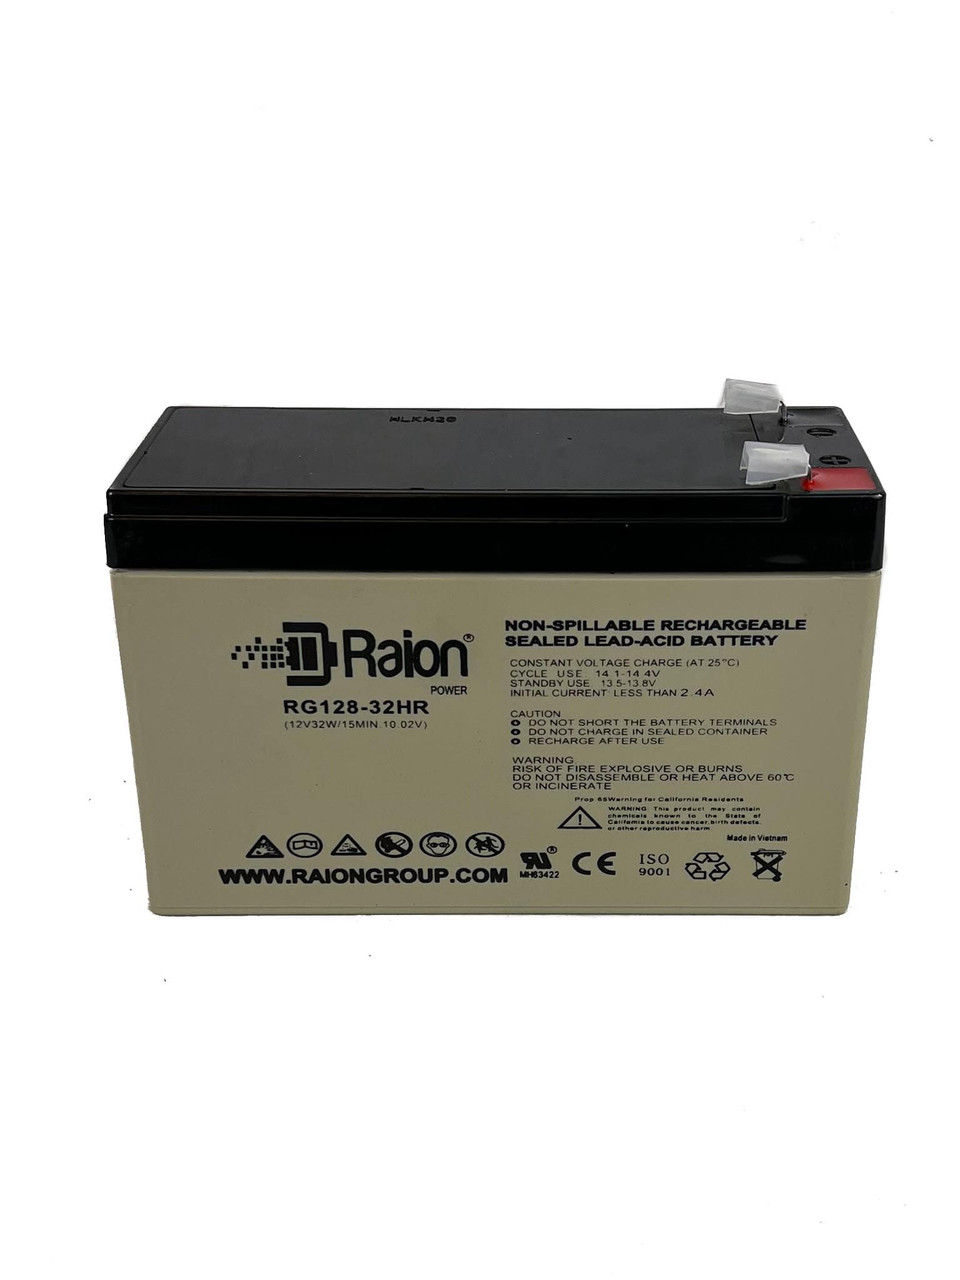 Raion Power RG128-32HR Replacement High Rate Battery Cartridge for AT&T U-Verse Broadband